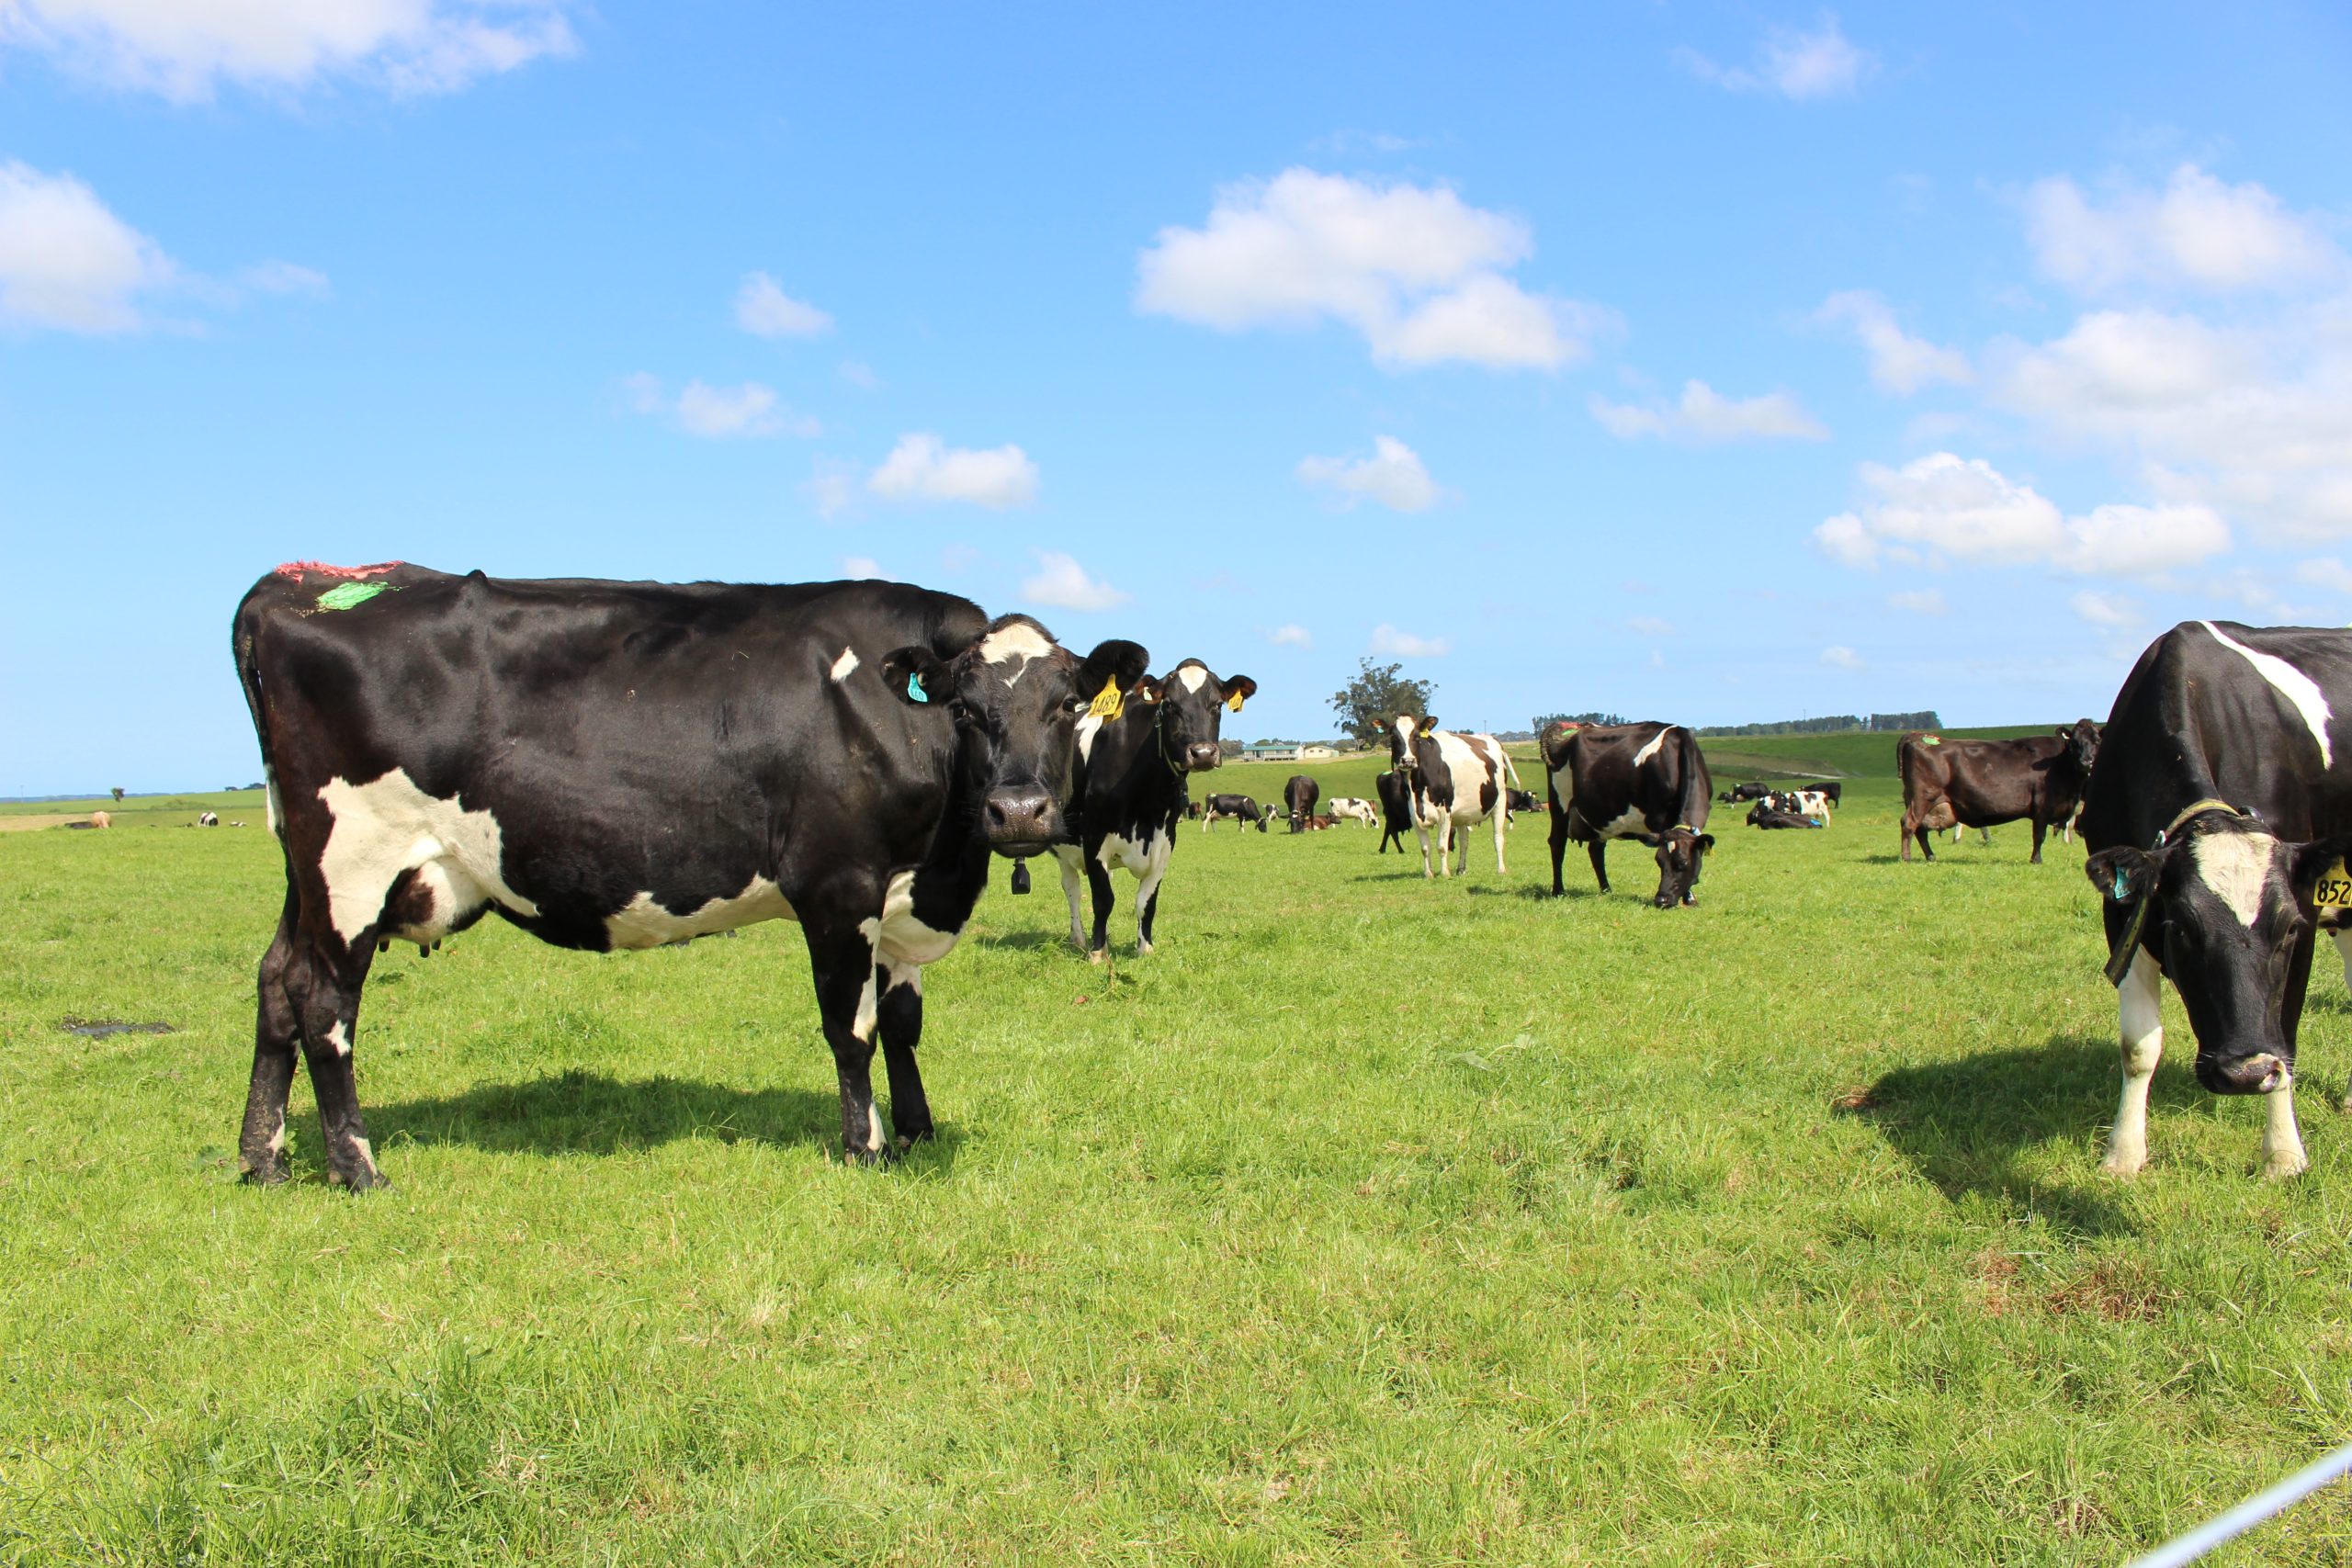 dairy cows grazing